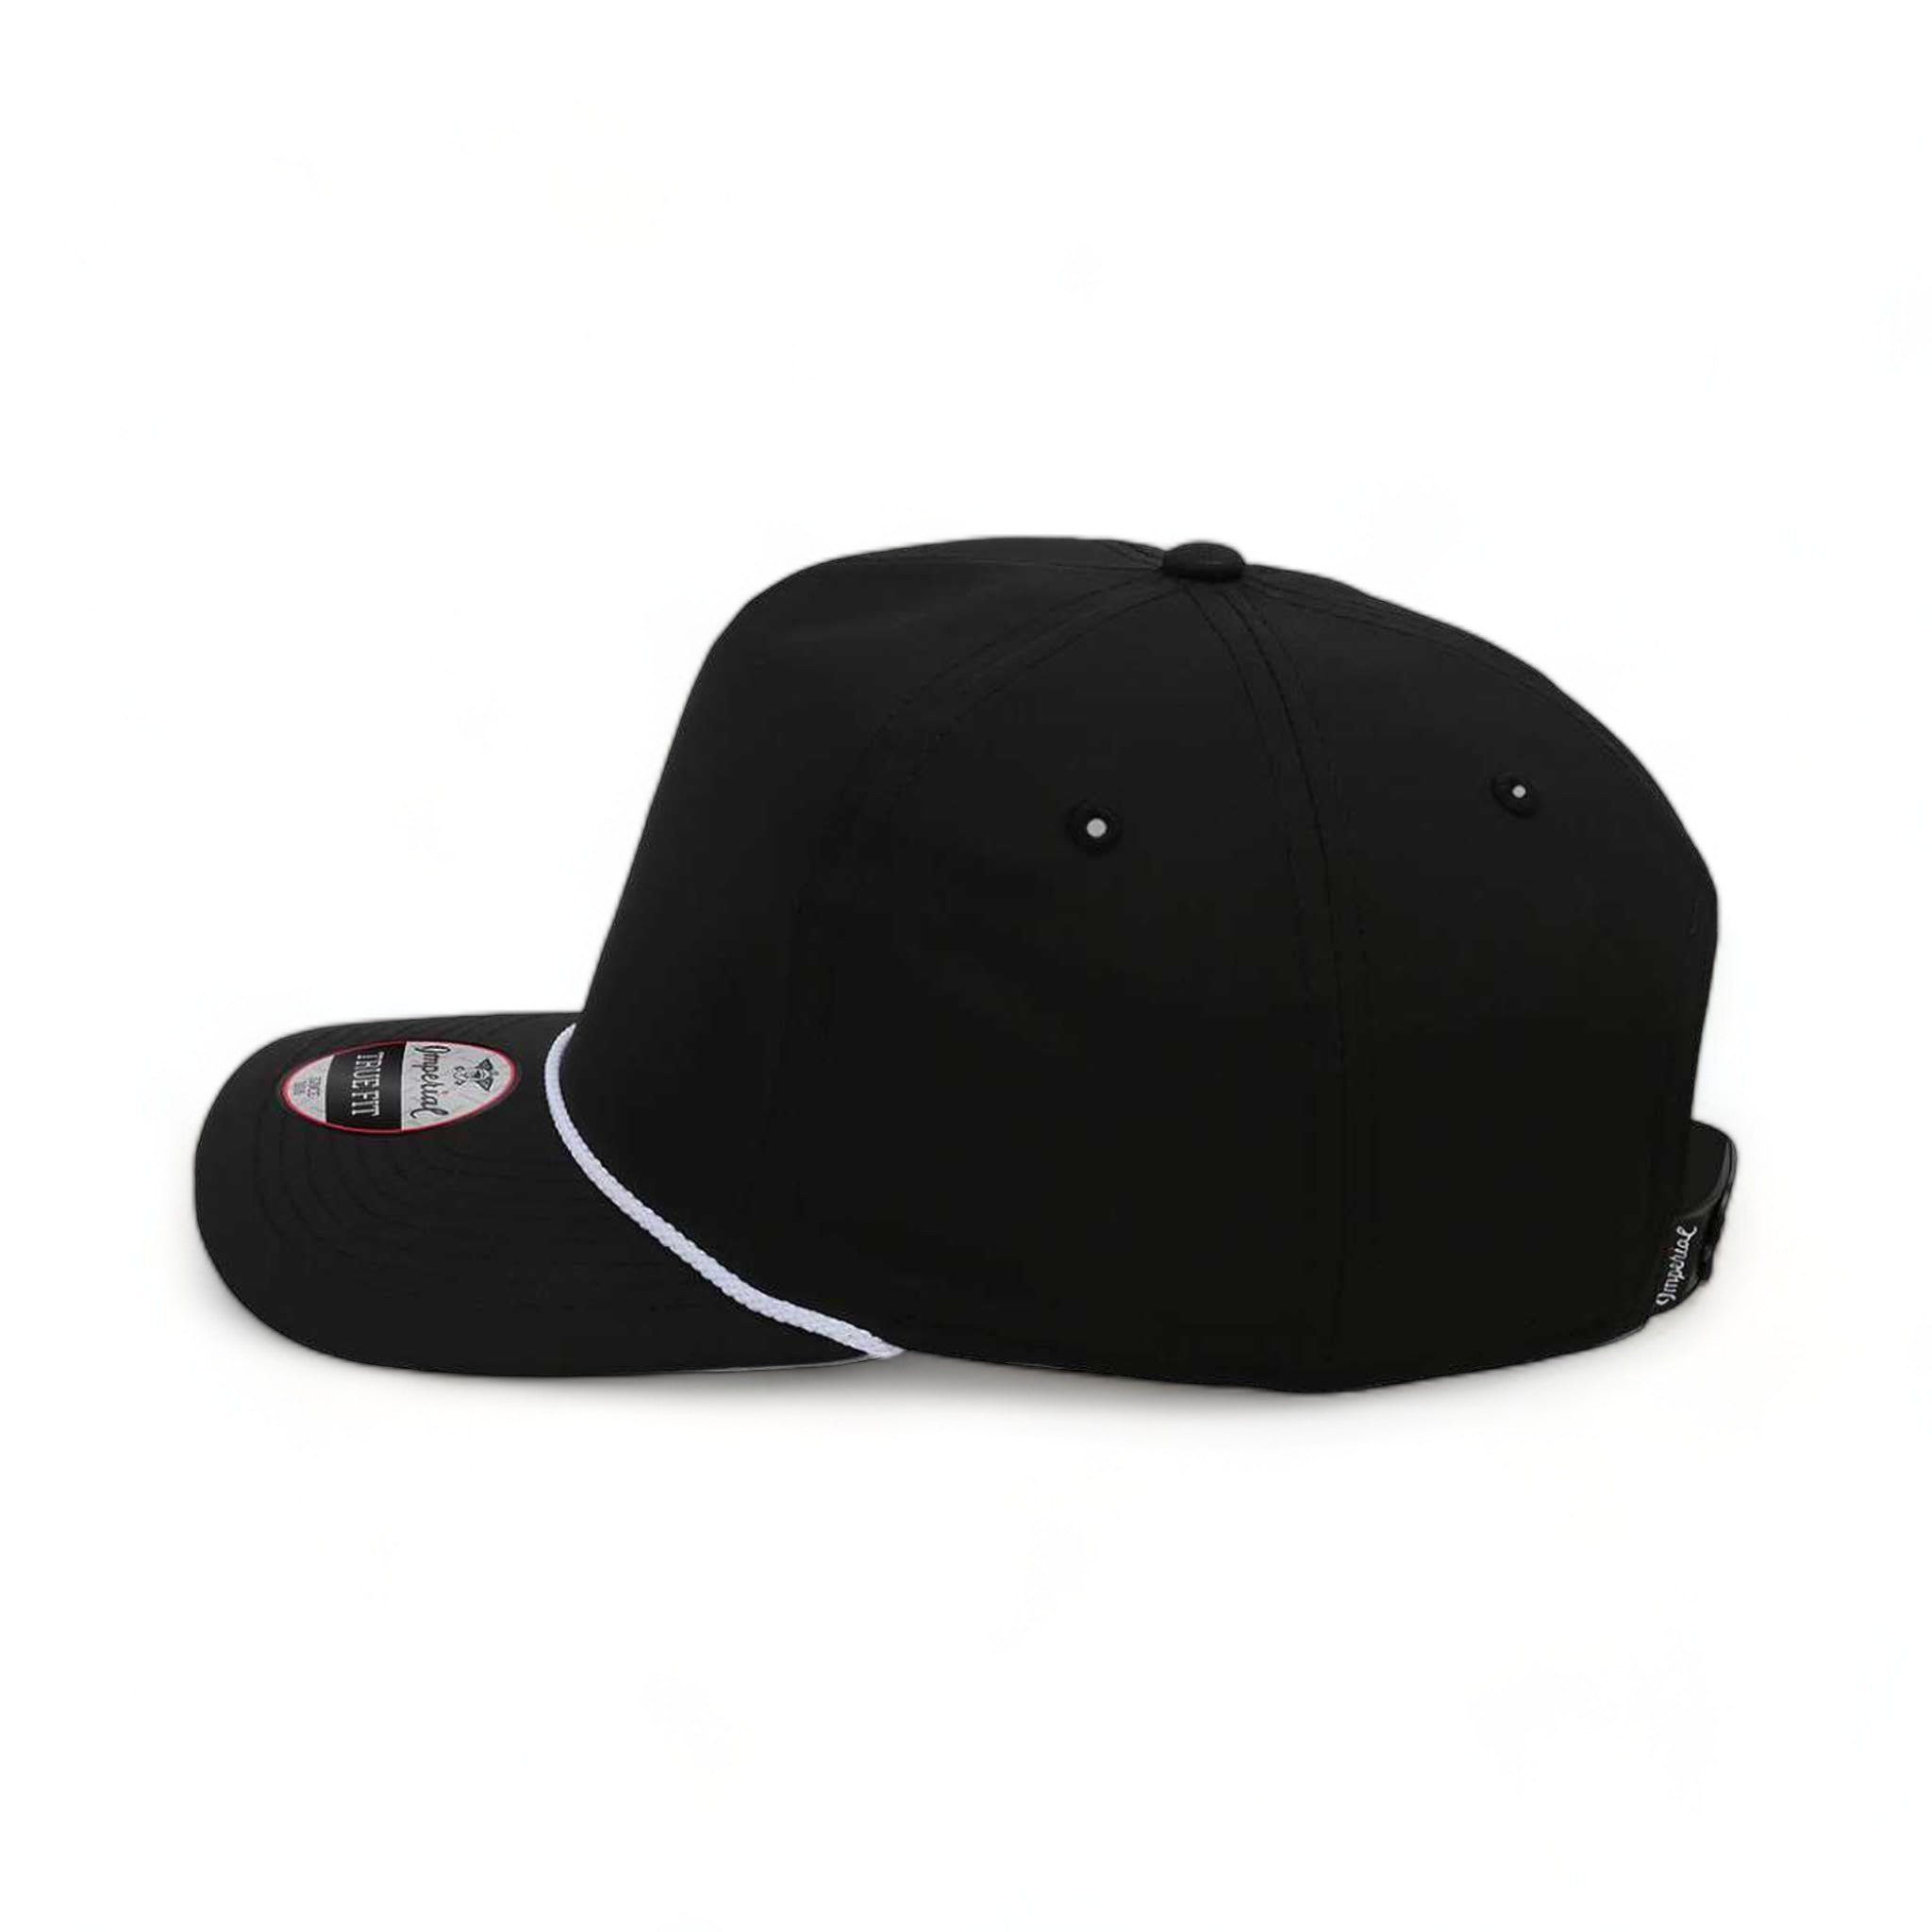 Side view of Imperial 5054 custom hat in black and white